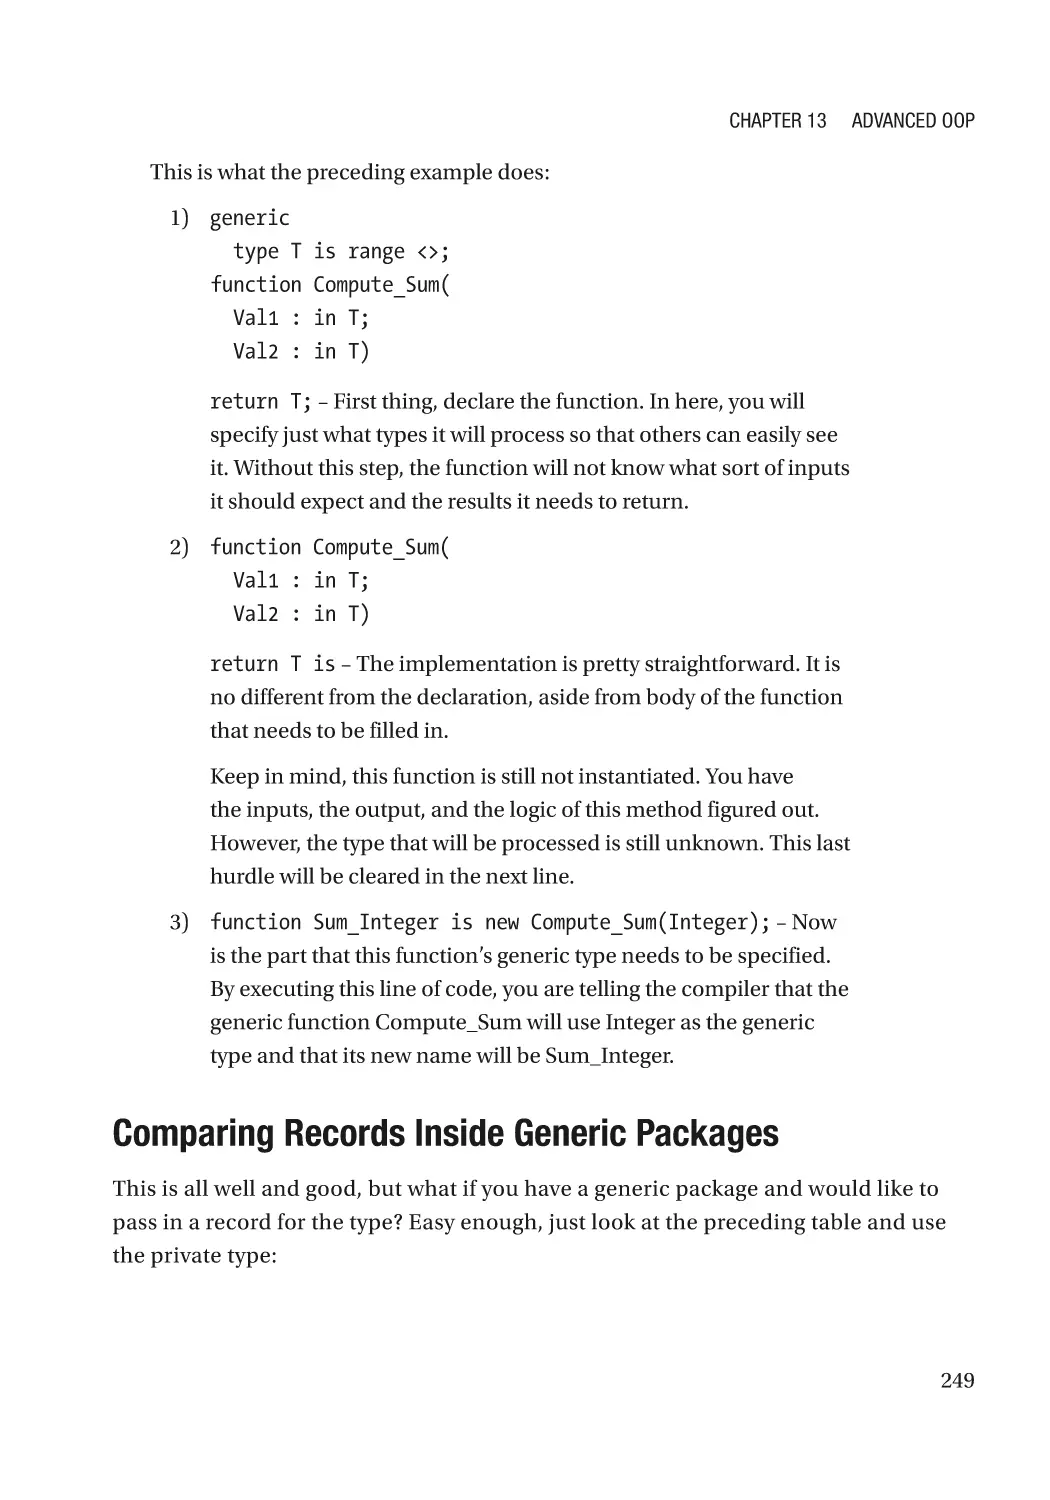 Comparing Records Inside Generic Packages